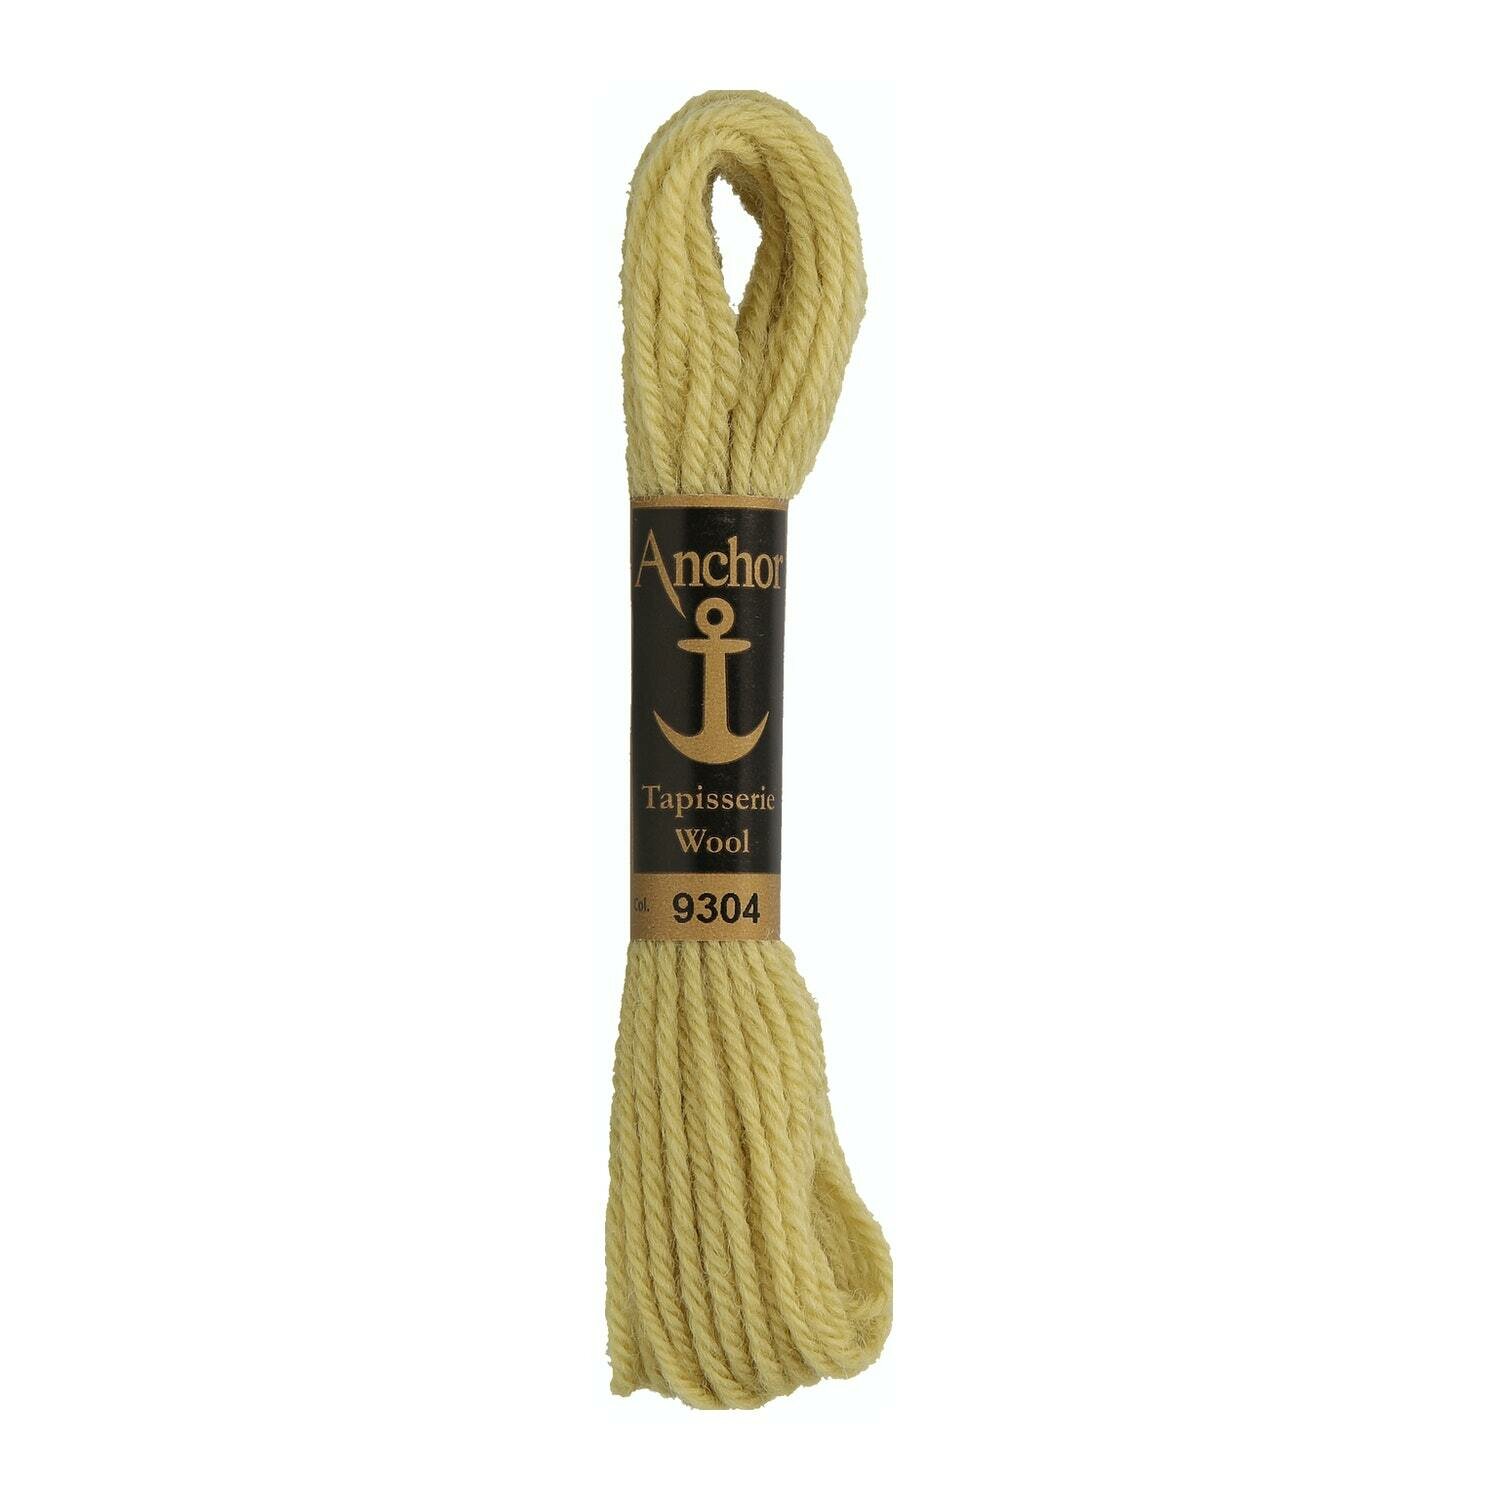 Anchor Tapisserie Wool # 09304